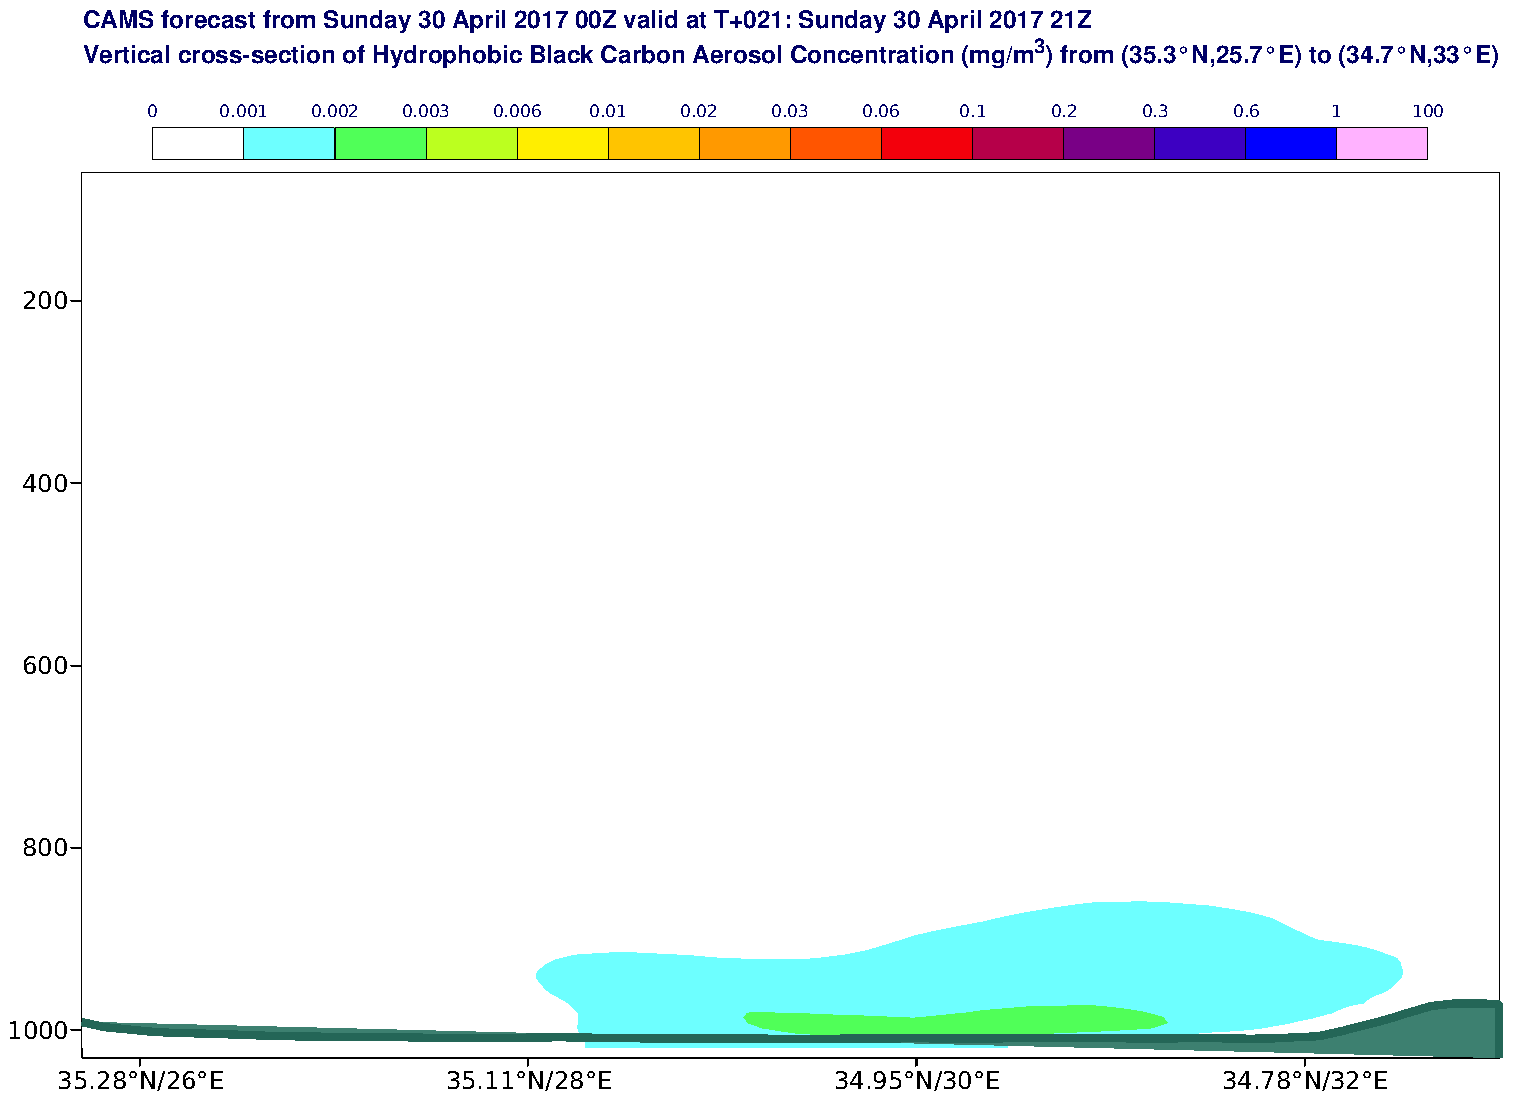 Vertical cross-section of Hydrophobic Black Carbon Aerosol Concentration (mg/m3) valid at T21 - 2017-04-30 21:00